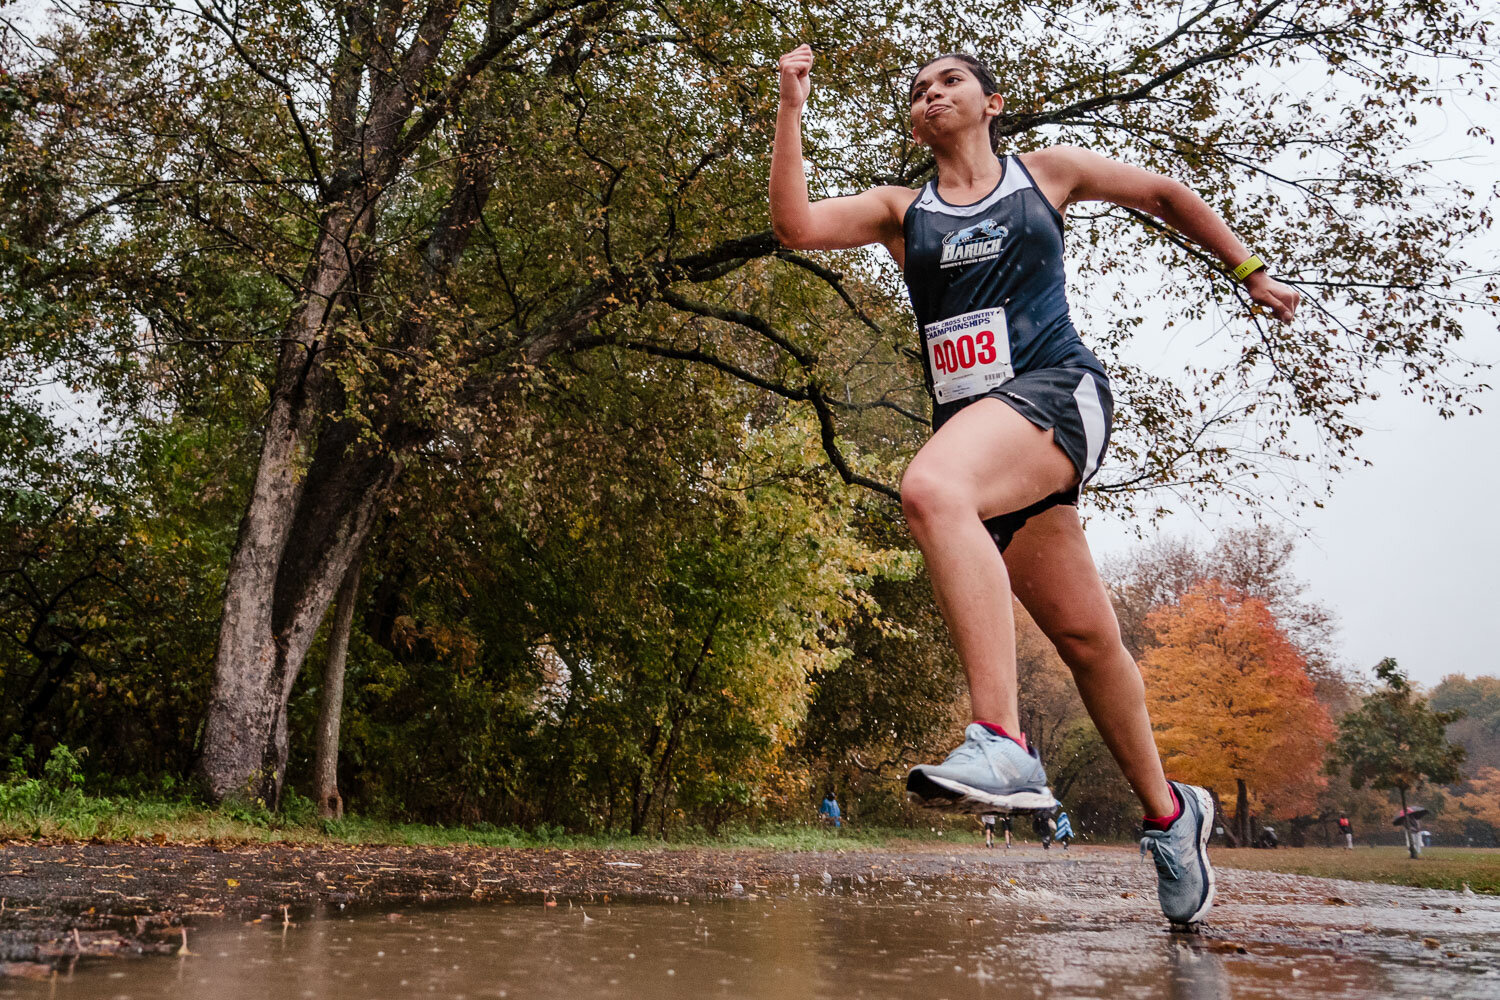 Baruch runner jumps over puddle during CUNYAC Championship race at van cortlandt park